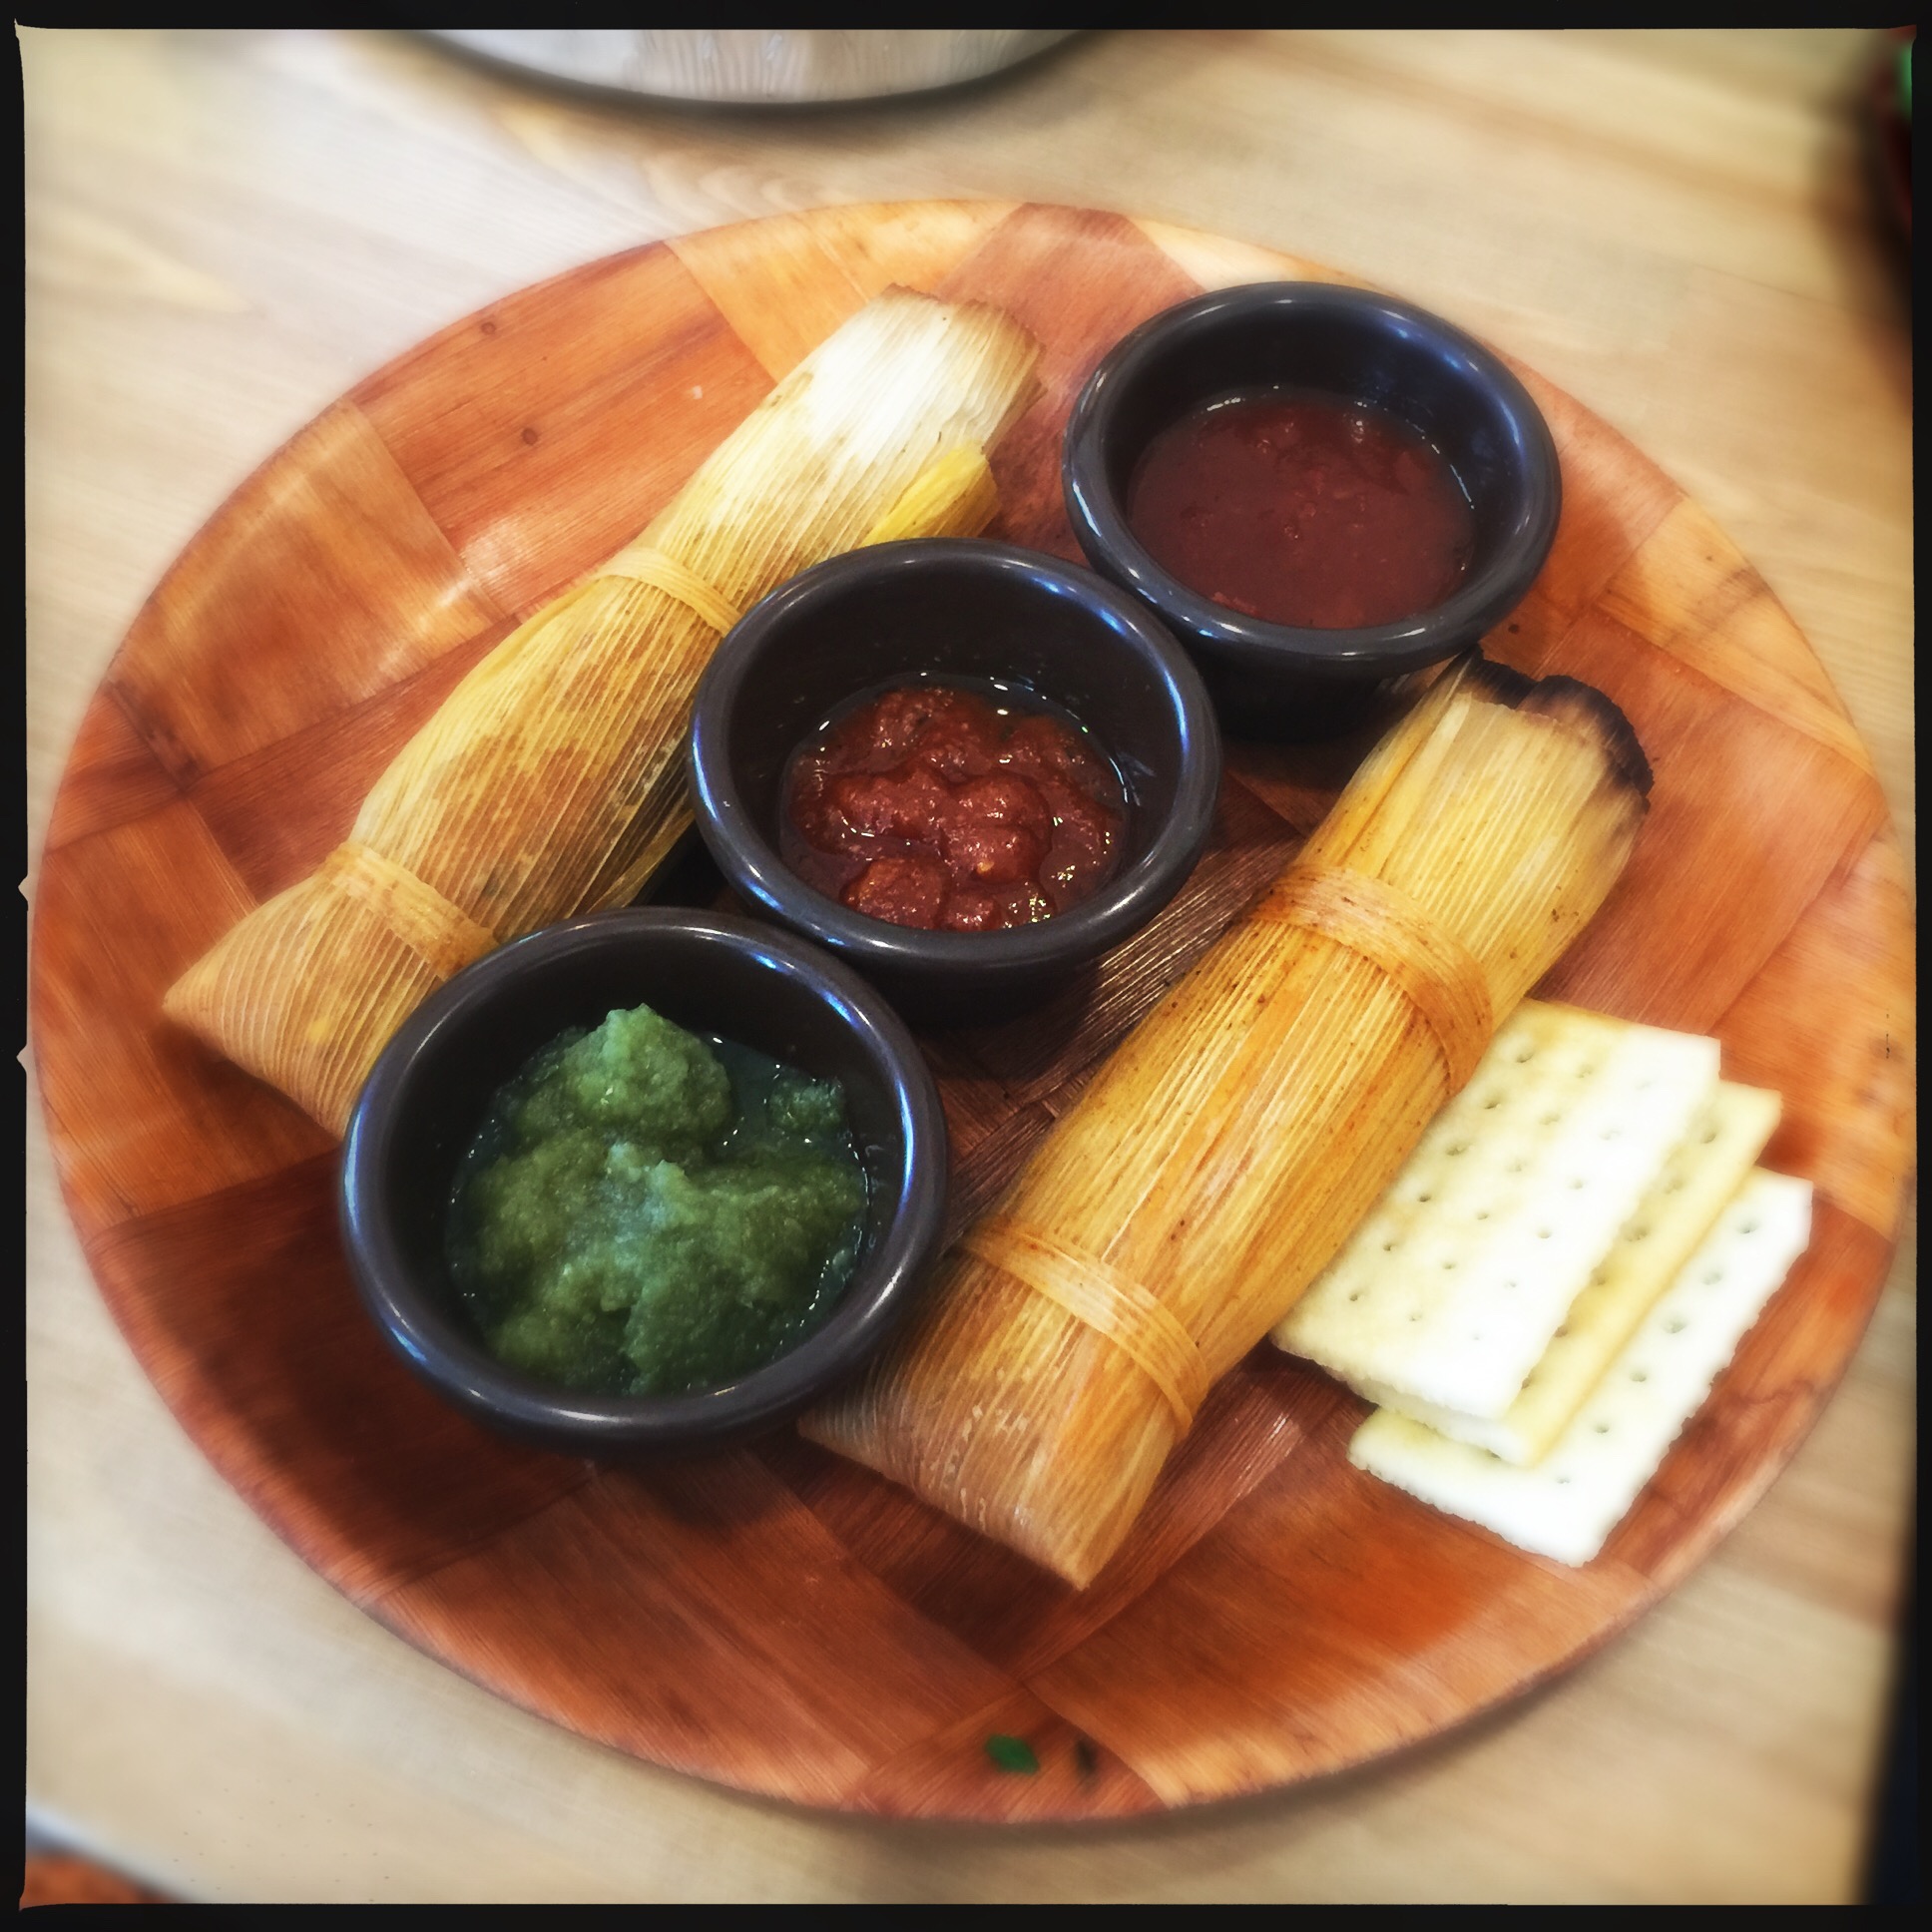 Apartment A Serves Savory Mississippi Tamales in a Charleston Single House (Charleston City Paper)